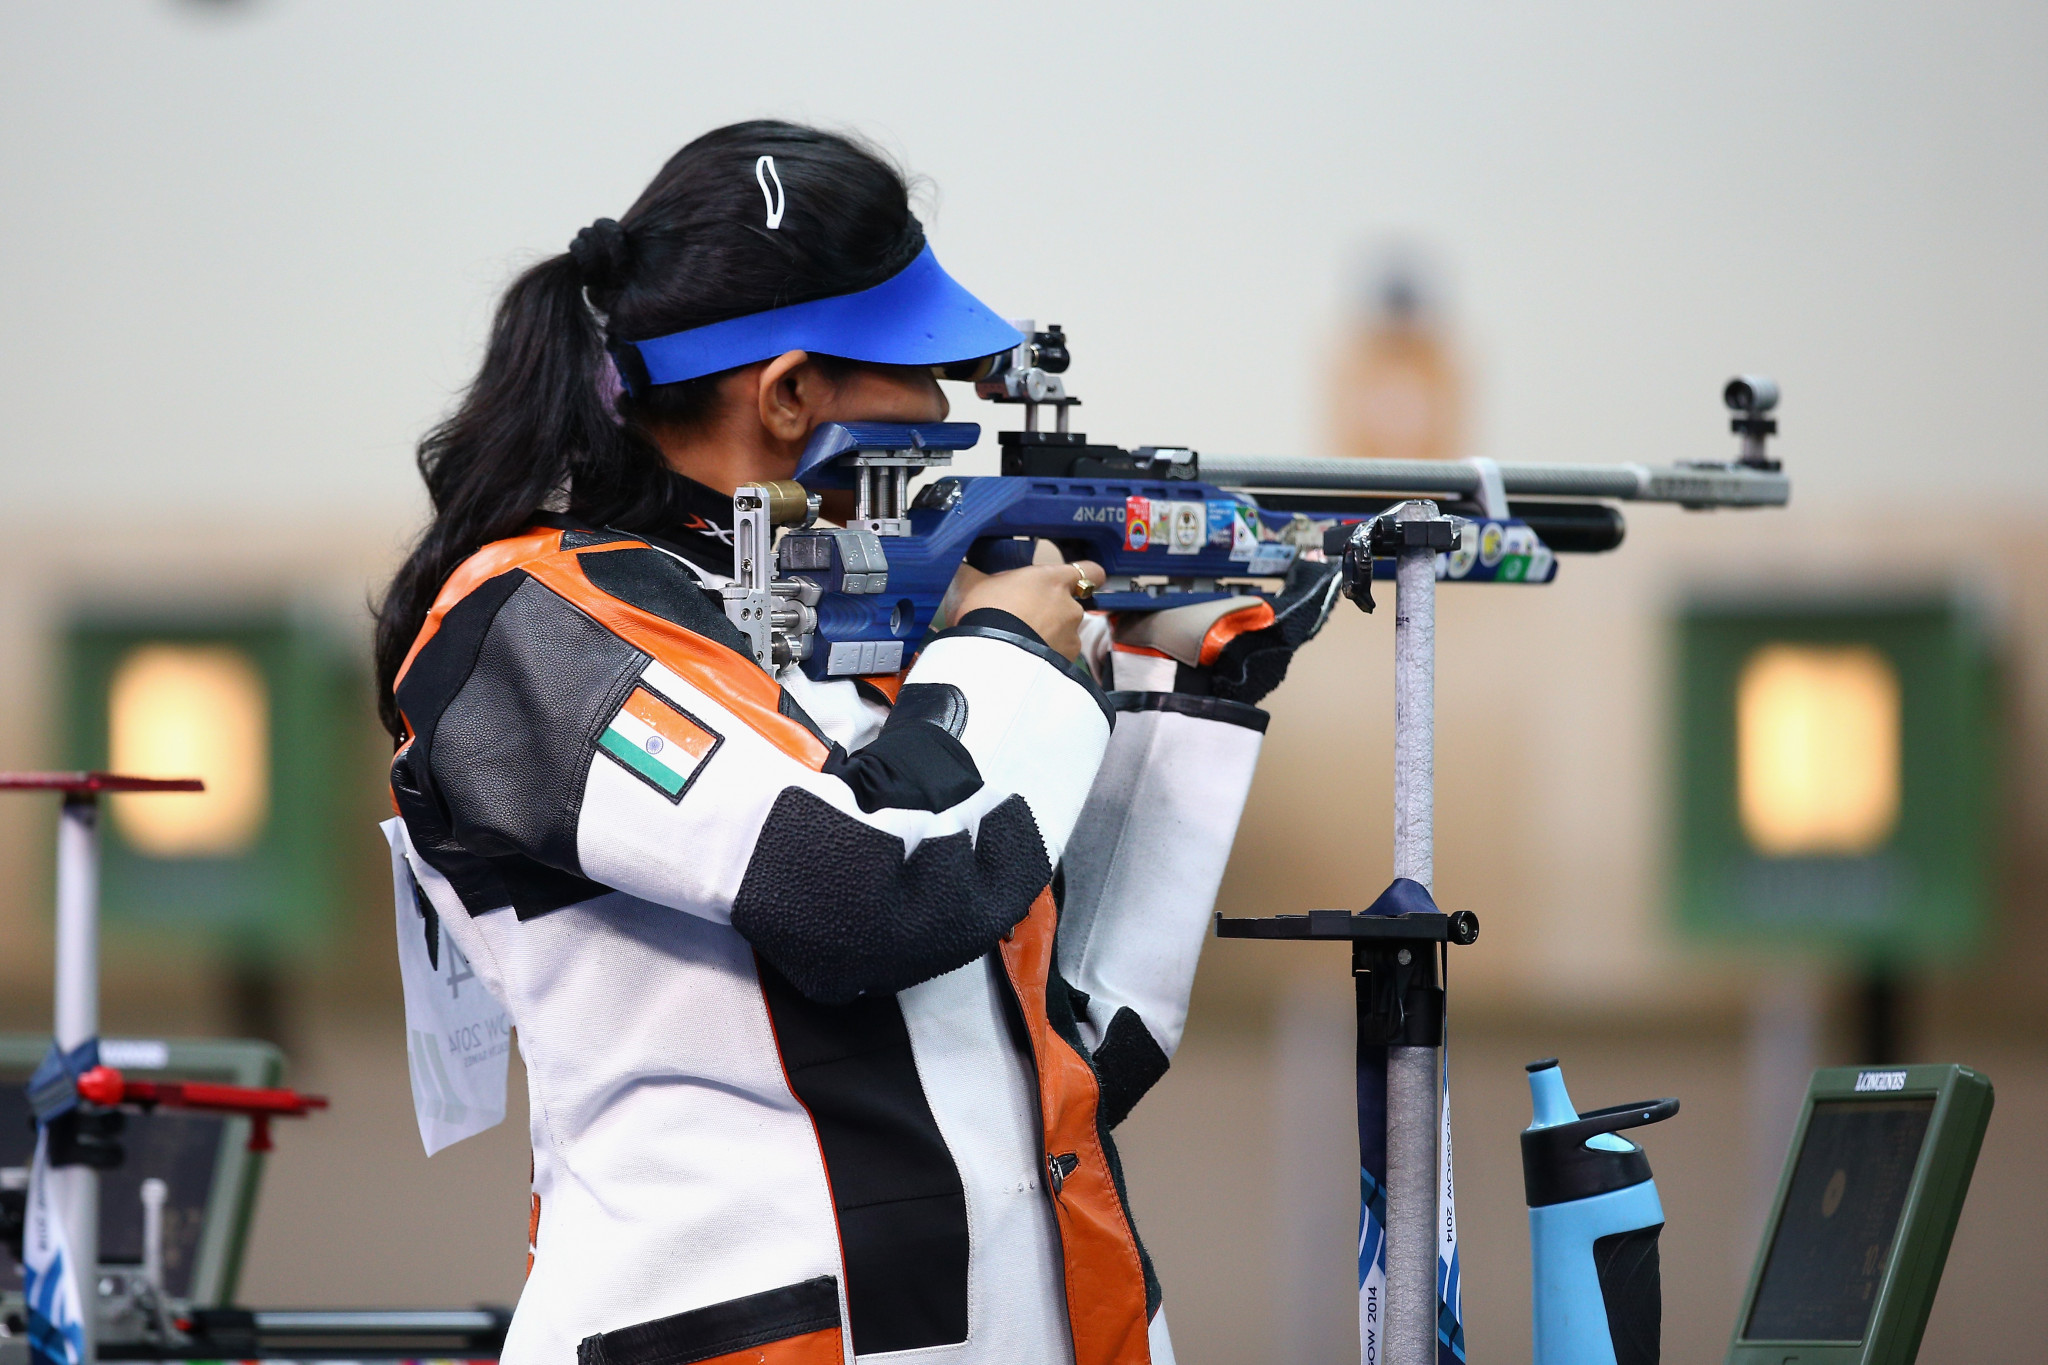 Shooting is India's most successful sport at the Commonwealth Games and they fear it could hit their medal count if it is not included in 2022 when Birmingham is expected to host the event ©Getty Images